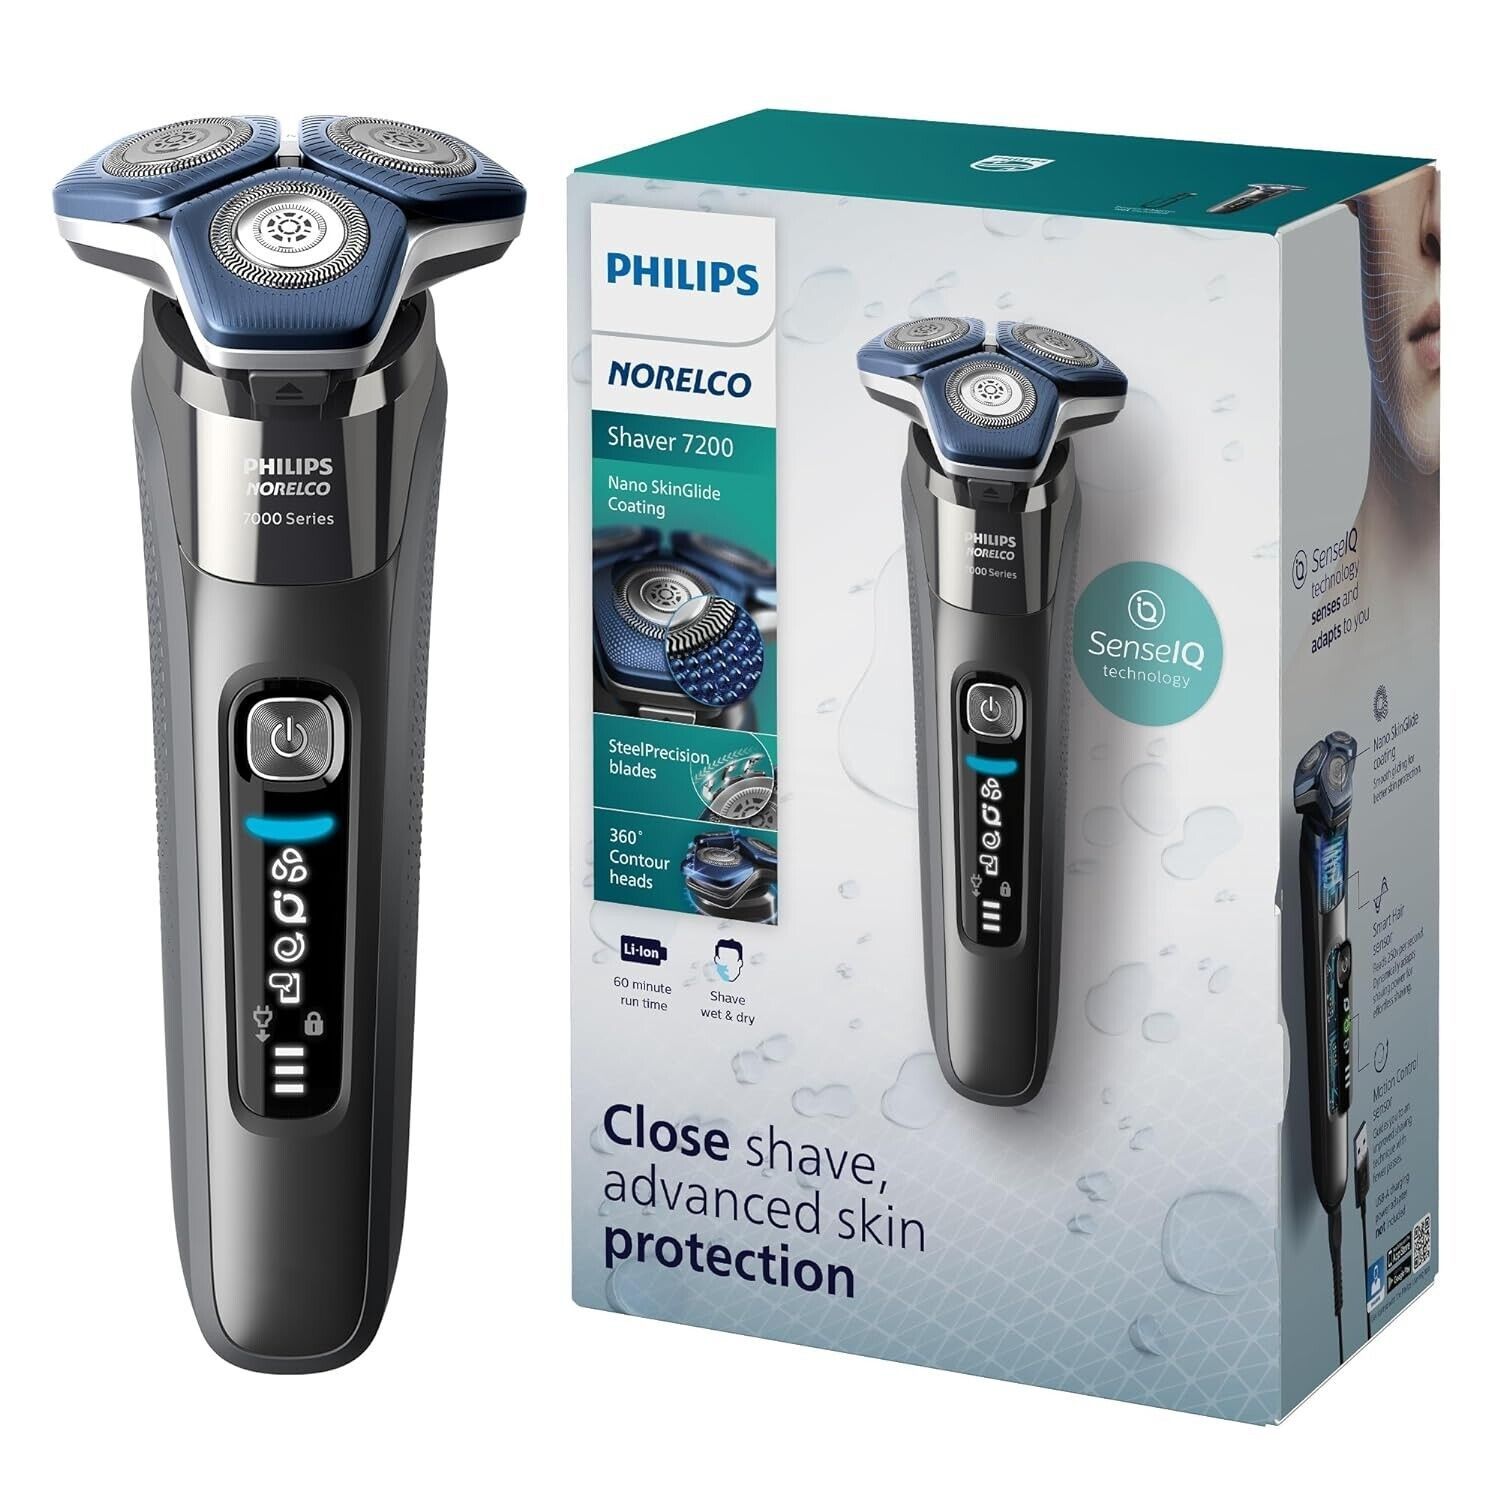 Open Box - Philips Norelco Shaver 7200, Rechargeable Wet & Dry Electric Shaver - $62.37